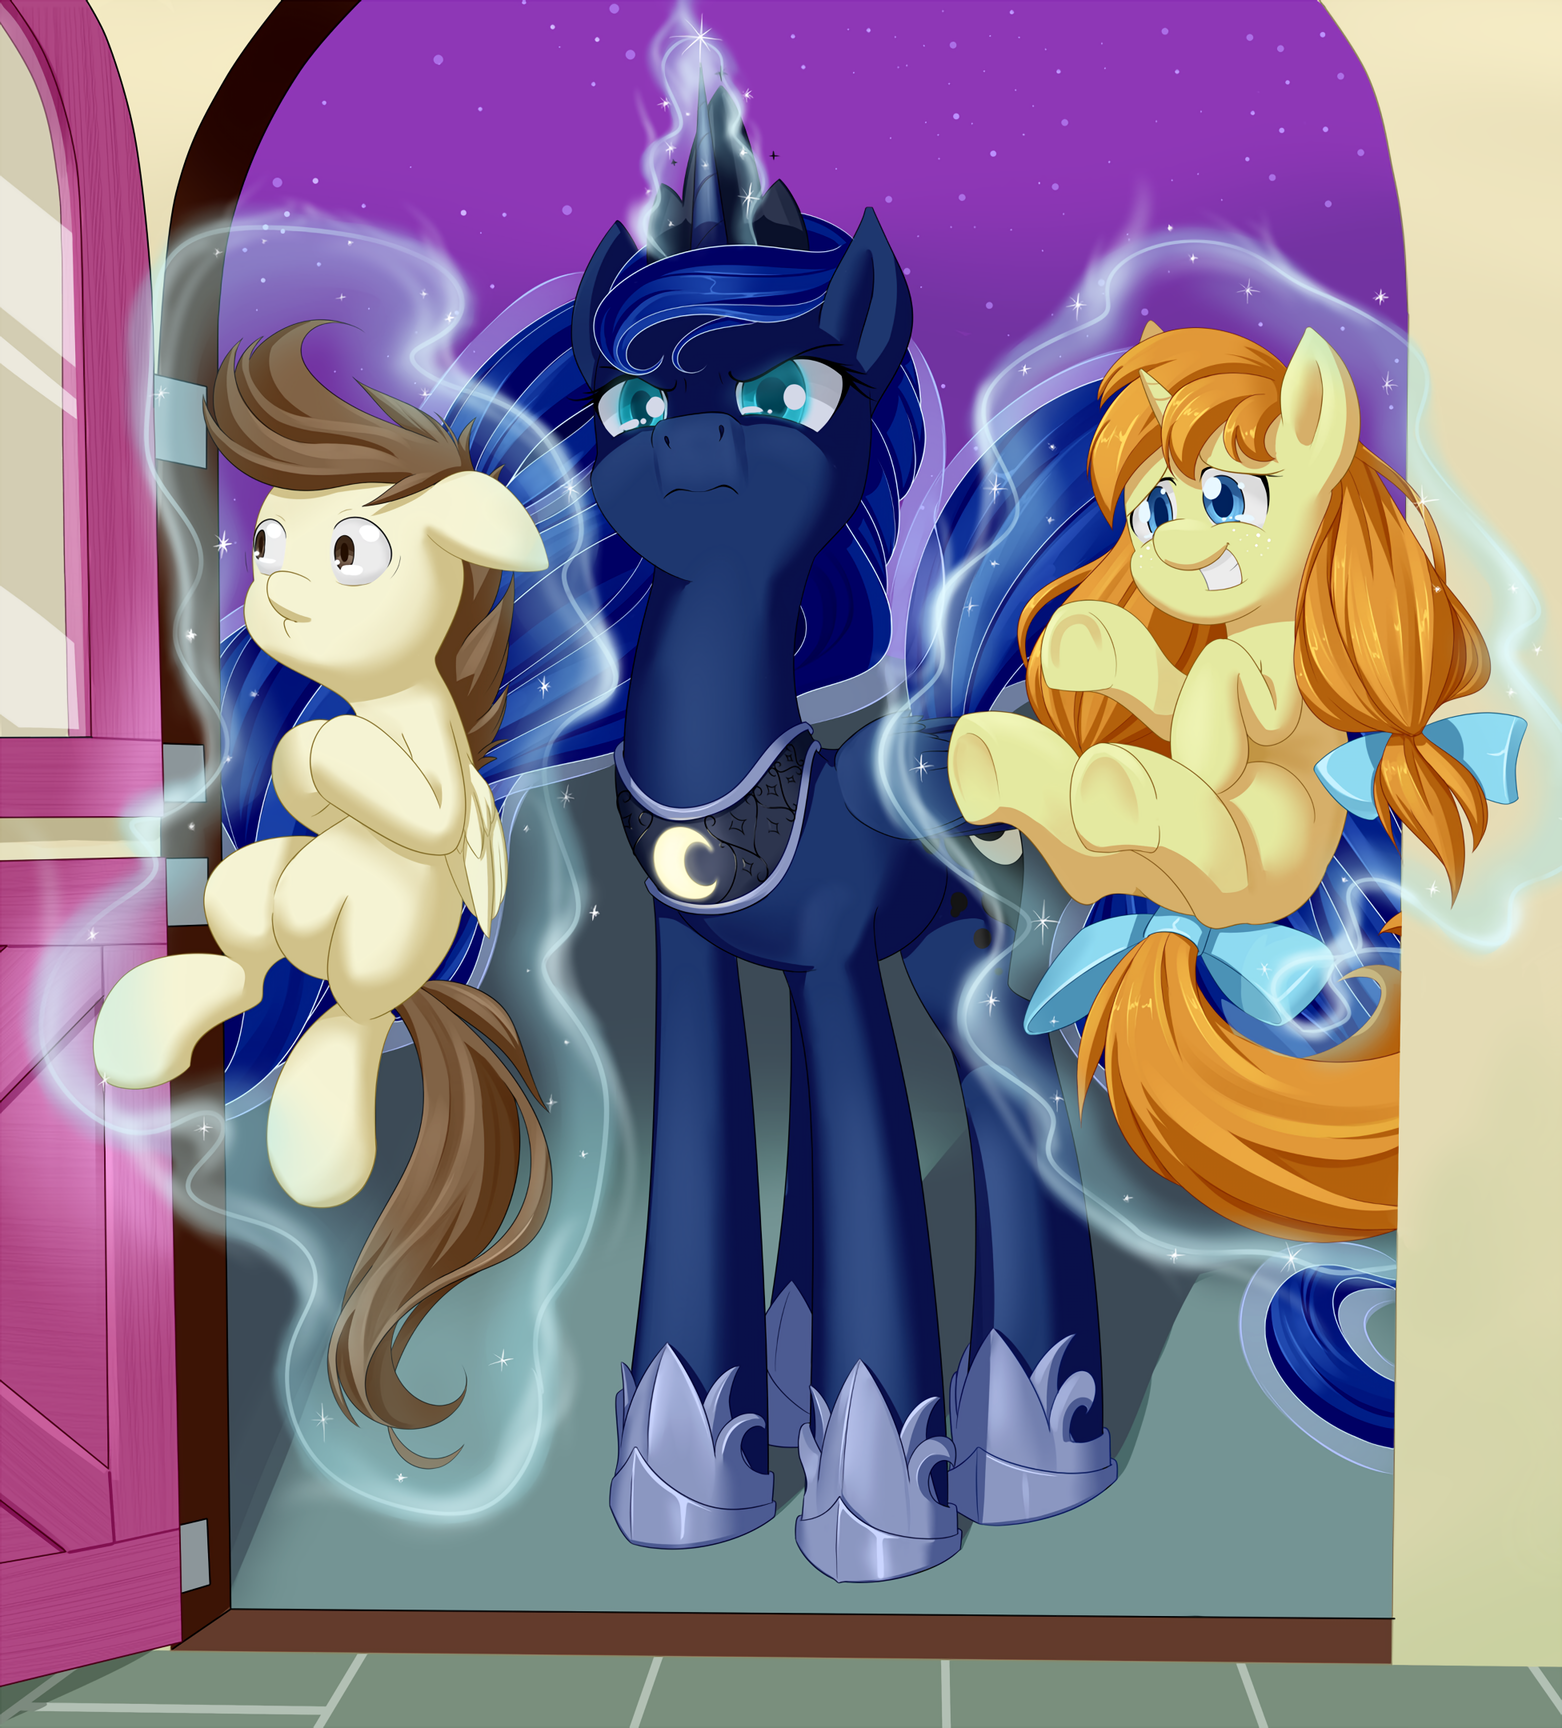 Are These Yours? - Dstears, Pumpkin Cake, Pound Cake, Princess luna, My little pony